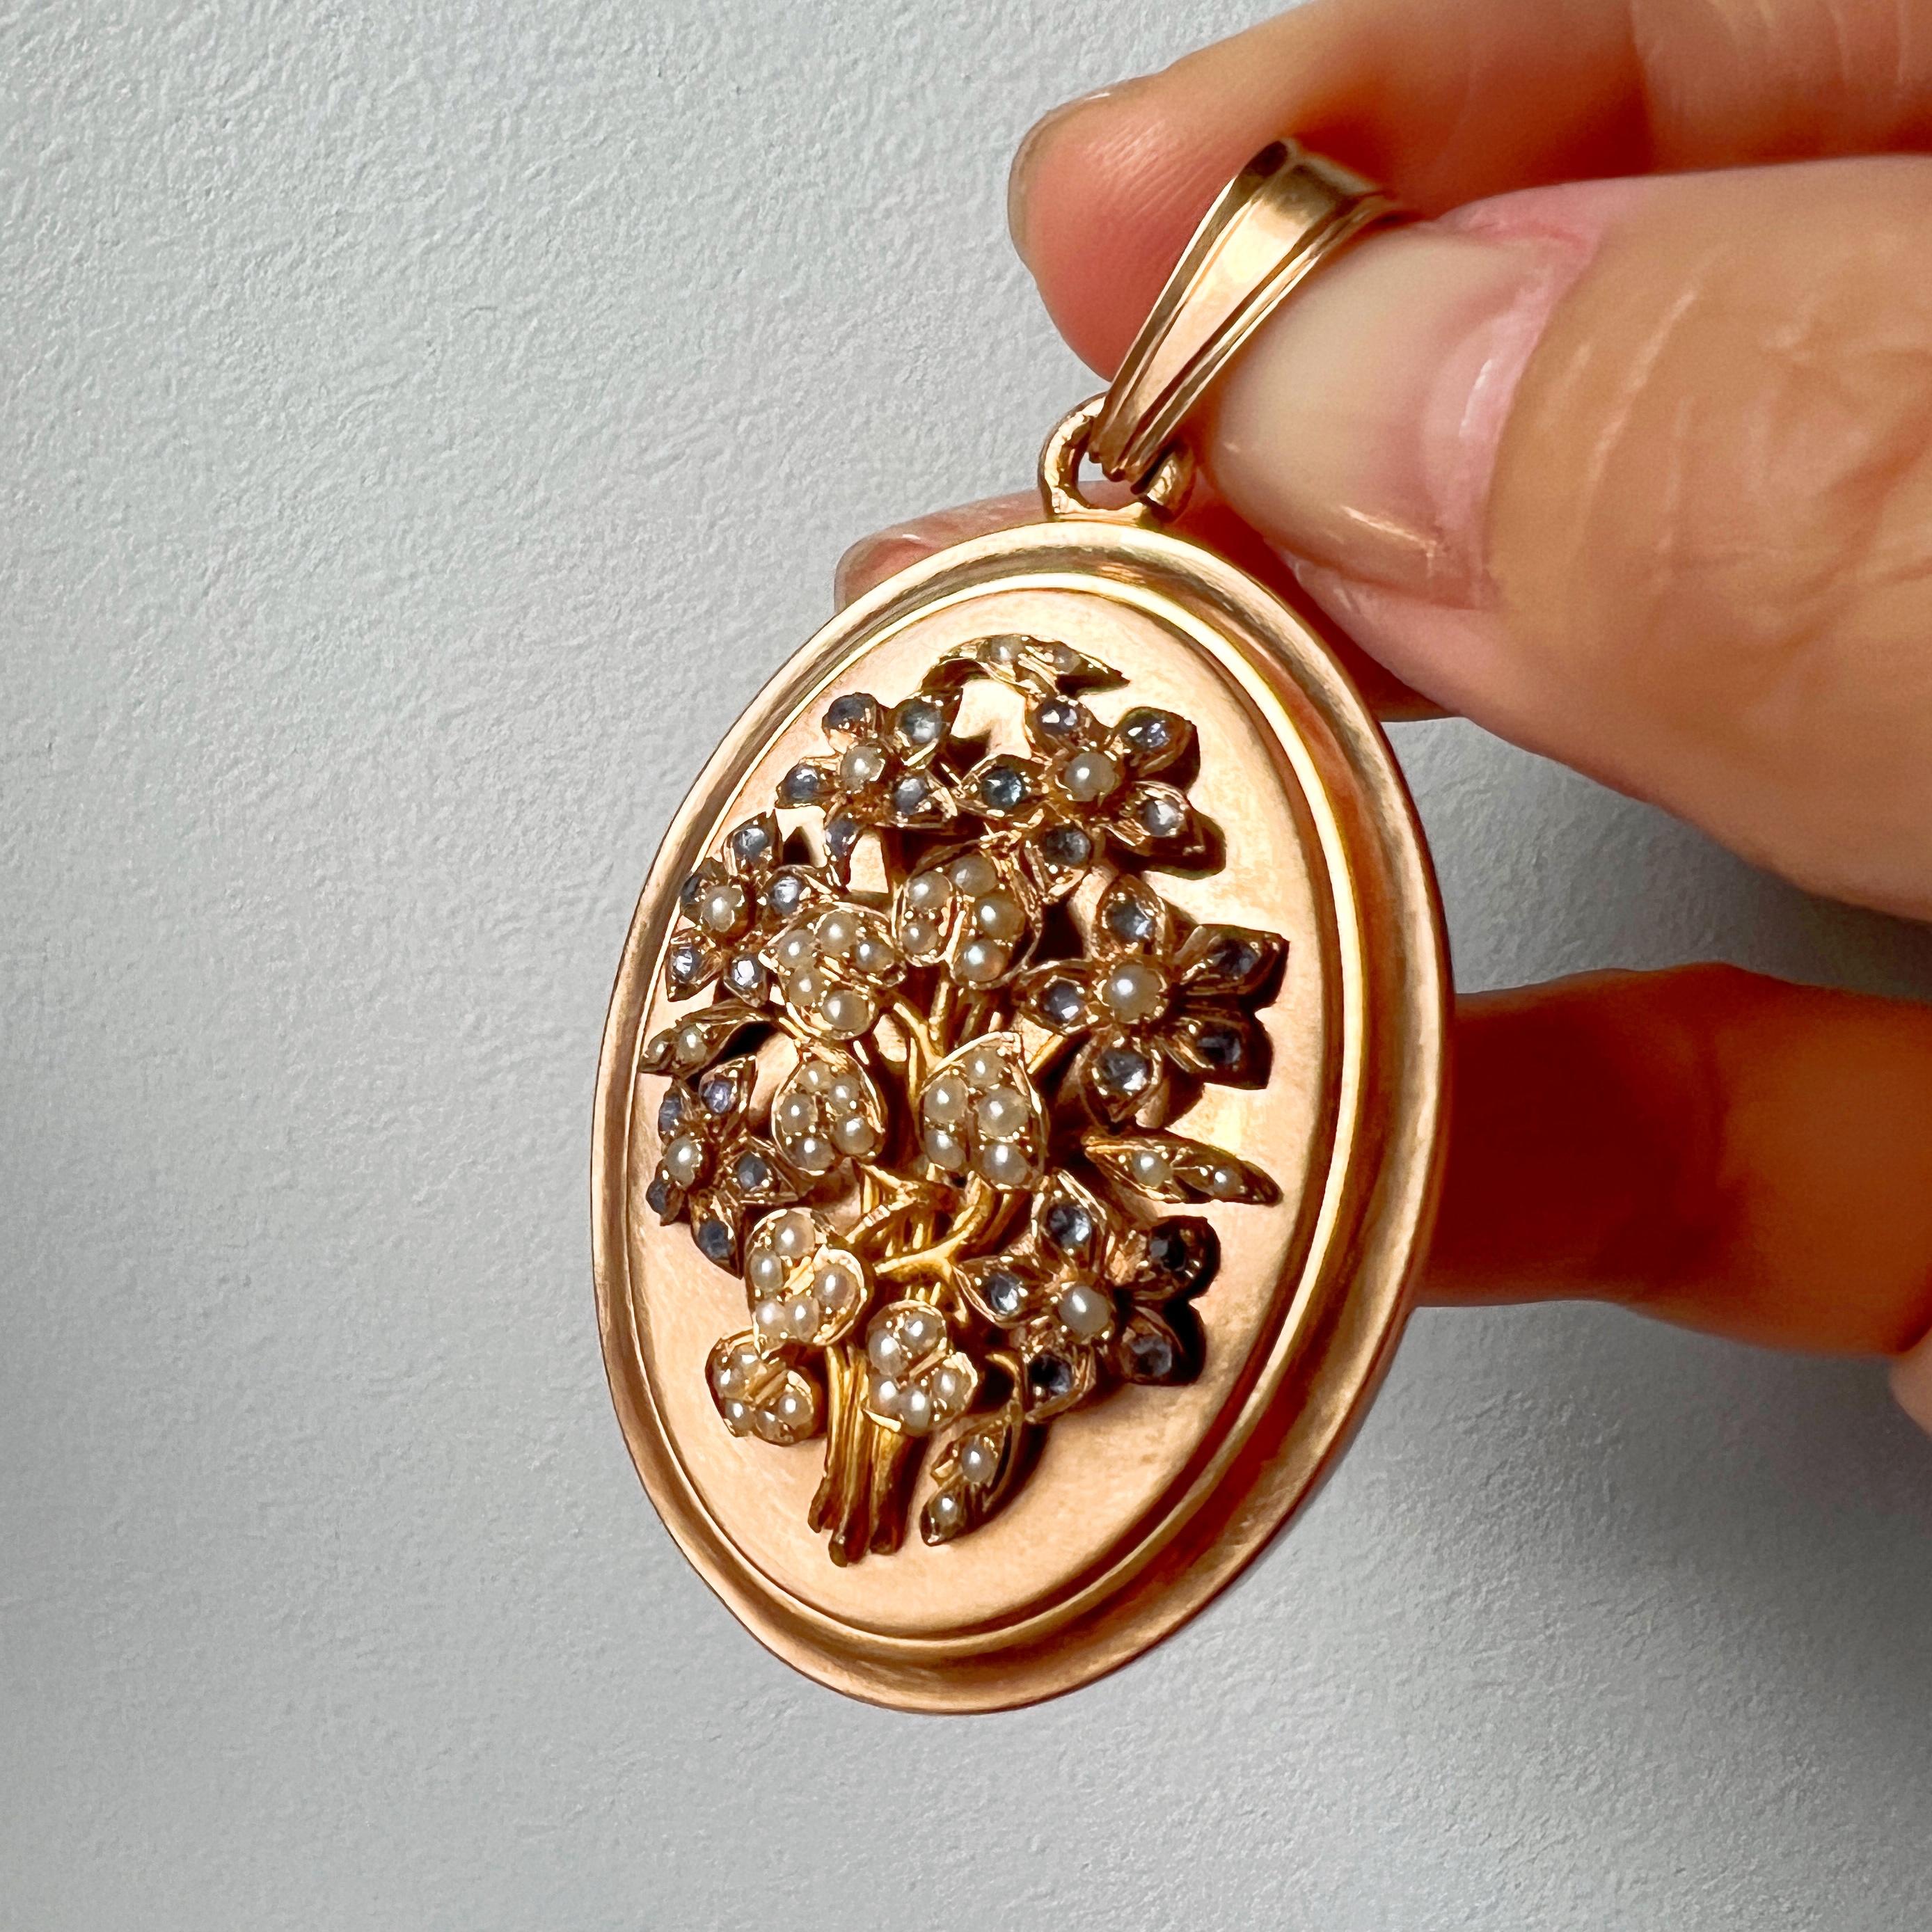 For sale a beautiful 18K gold, Victorian-era locket pendant, which features a lovely bouquet of flowers meticulously crafted from natural seed pearls and radiant blue sapphires on its front cover. The petals and leaves are expertly shaped, providing